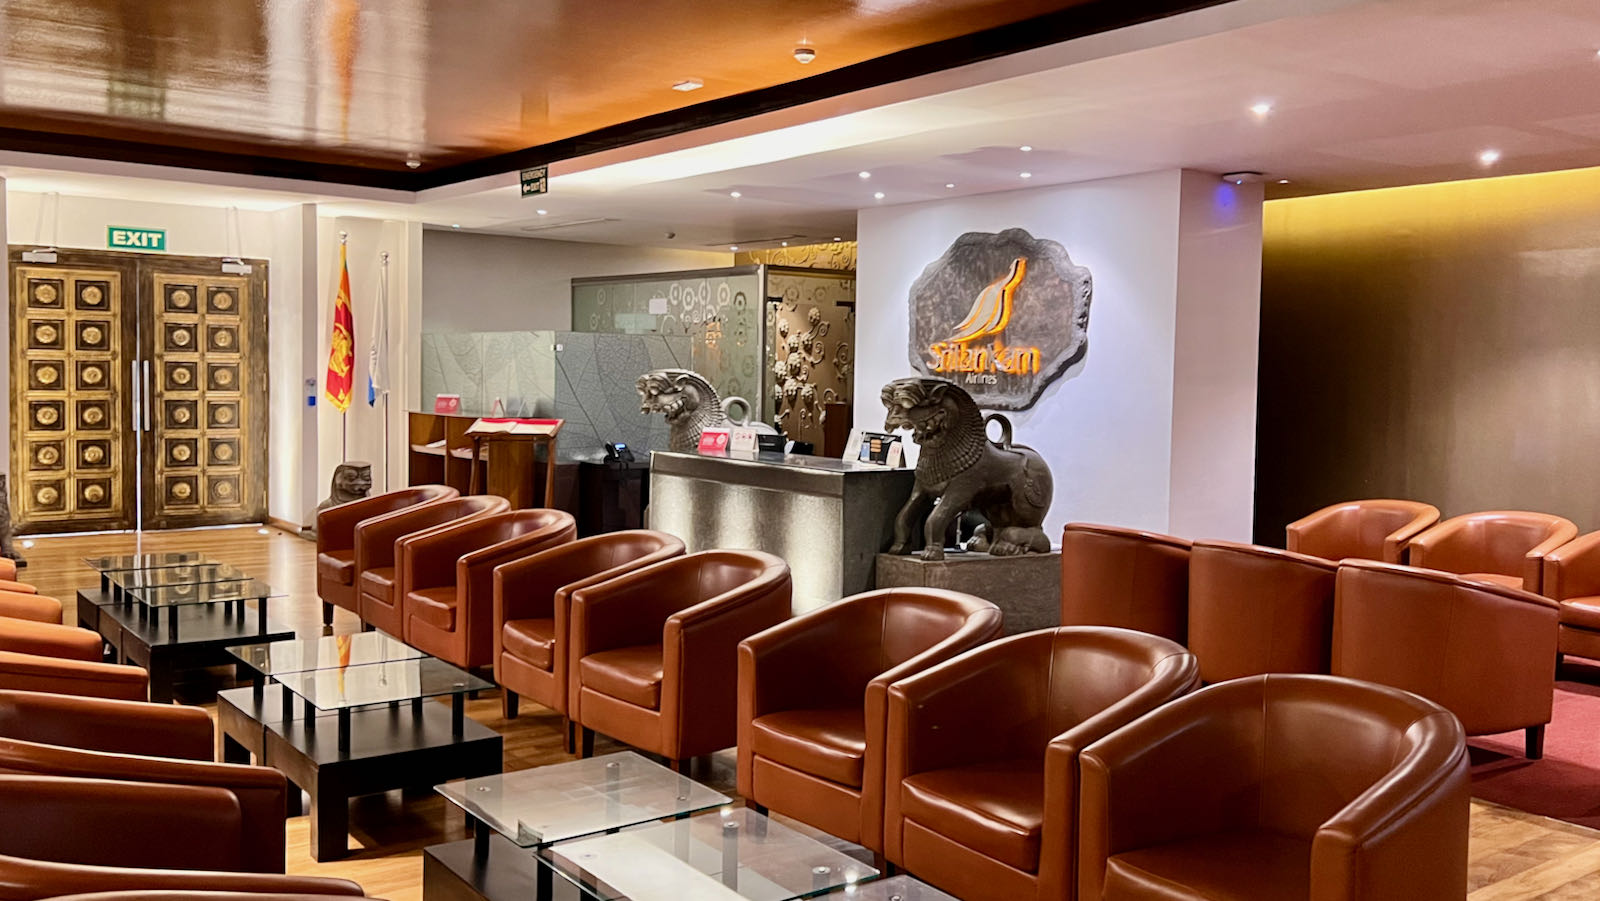 Sri Lankan Airlines flagship Business lounge Colombo Airport seating